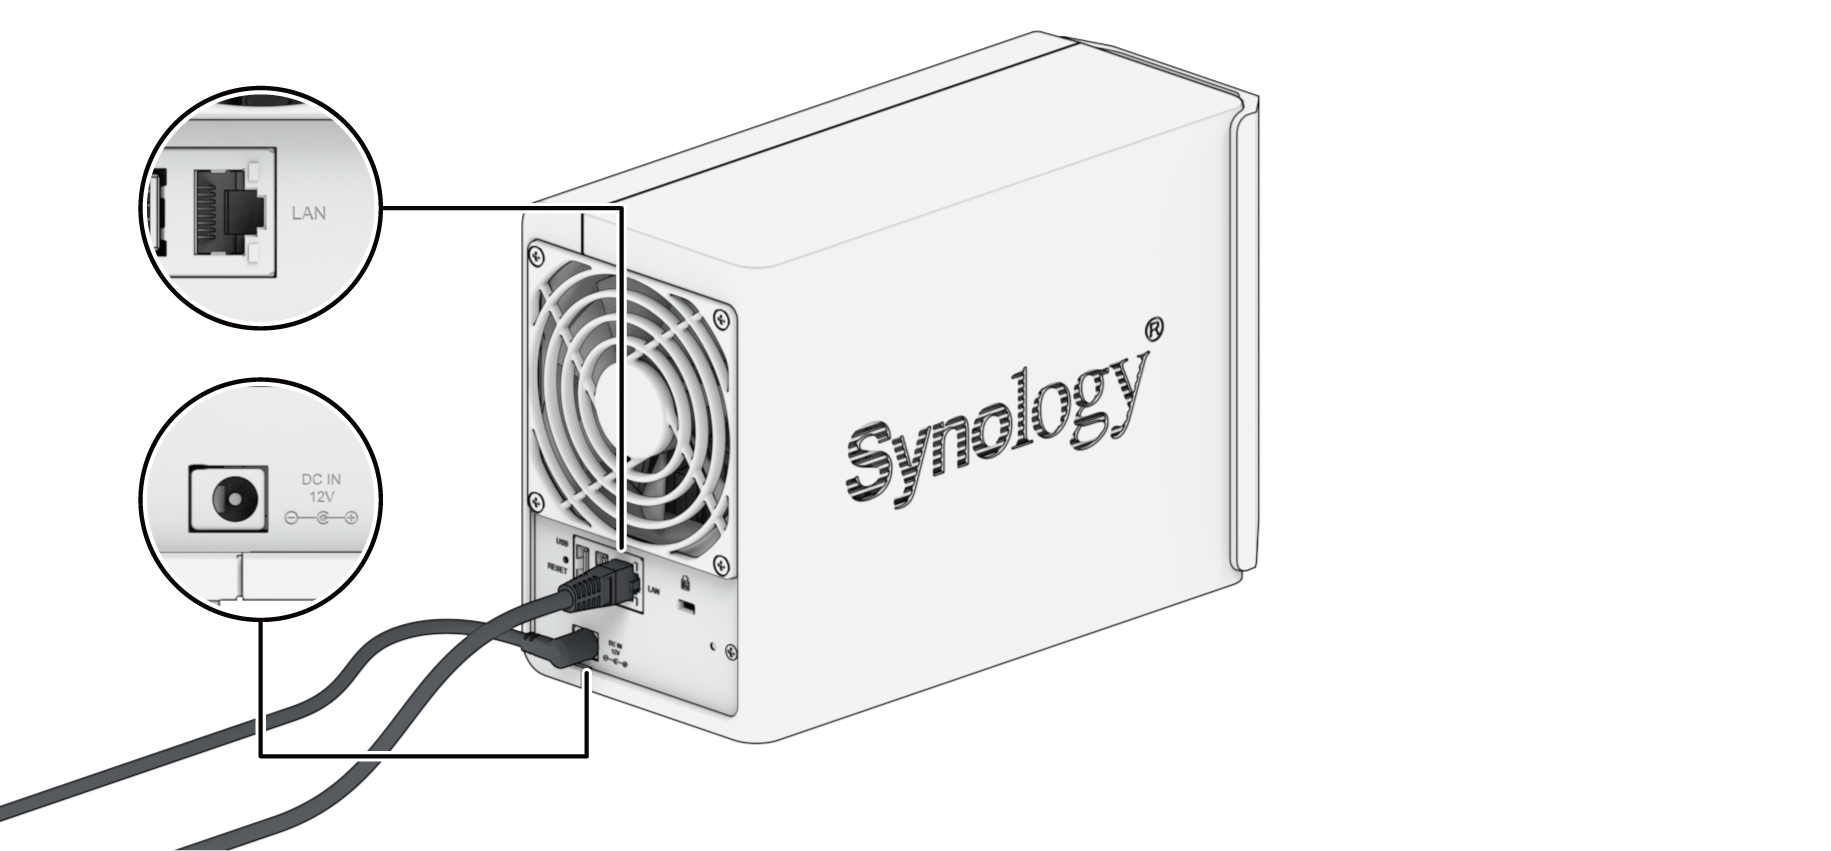 Synology DiskStation DS223 2tb NAS 2x1000gb Crucial MX500 SSD Drives  Installed